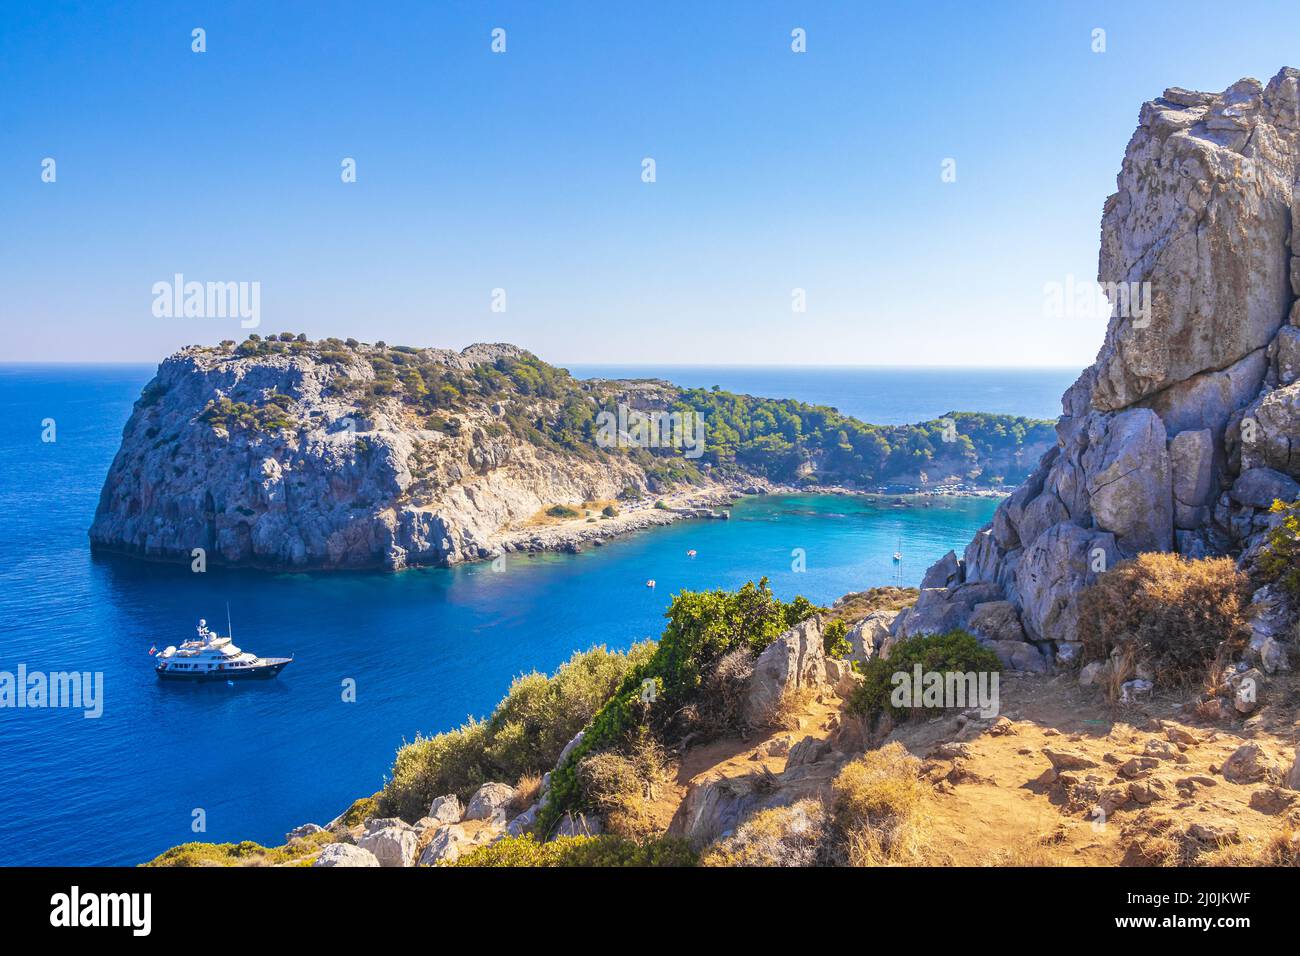 Anthony Quinn Bay with turquoise clear water Faliraki Rhodes Greece. Stock Photo